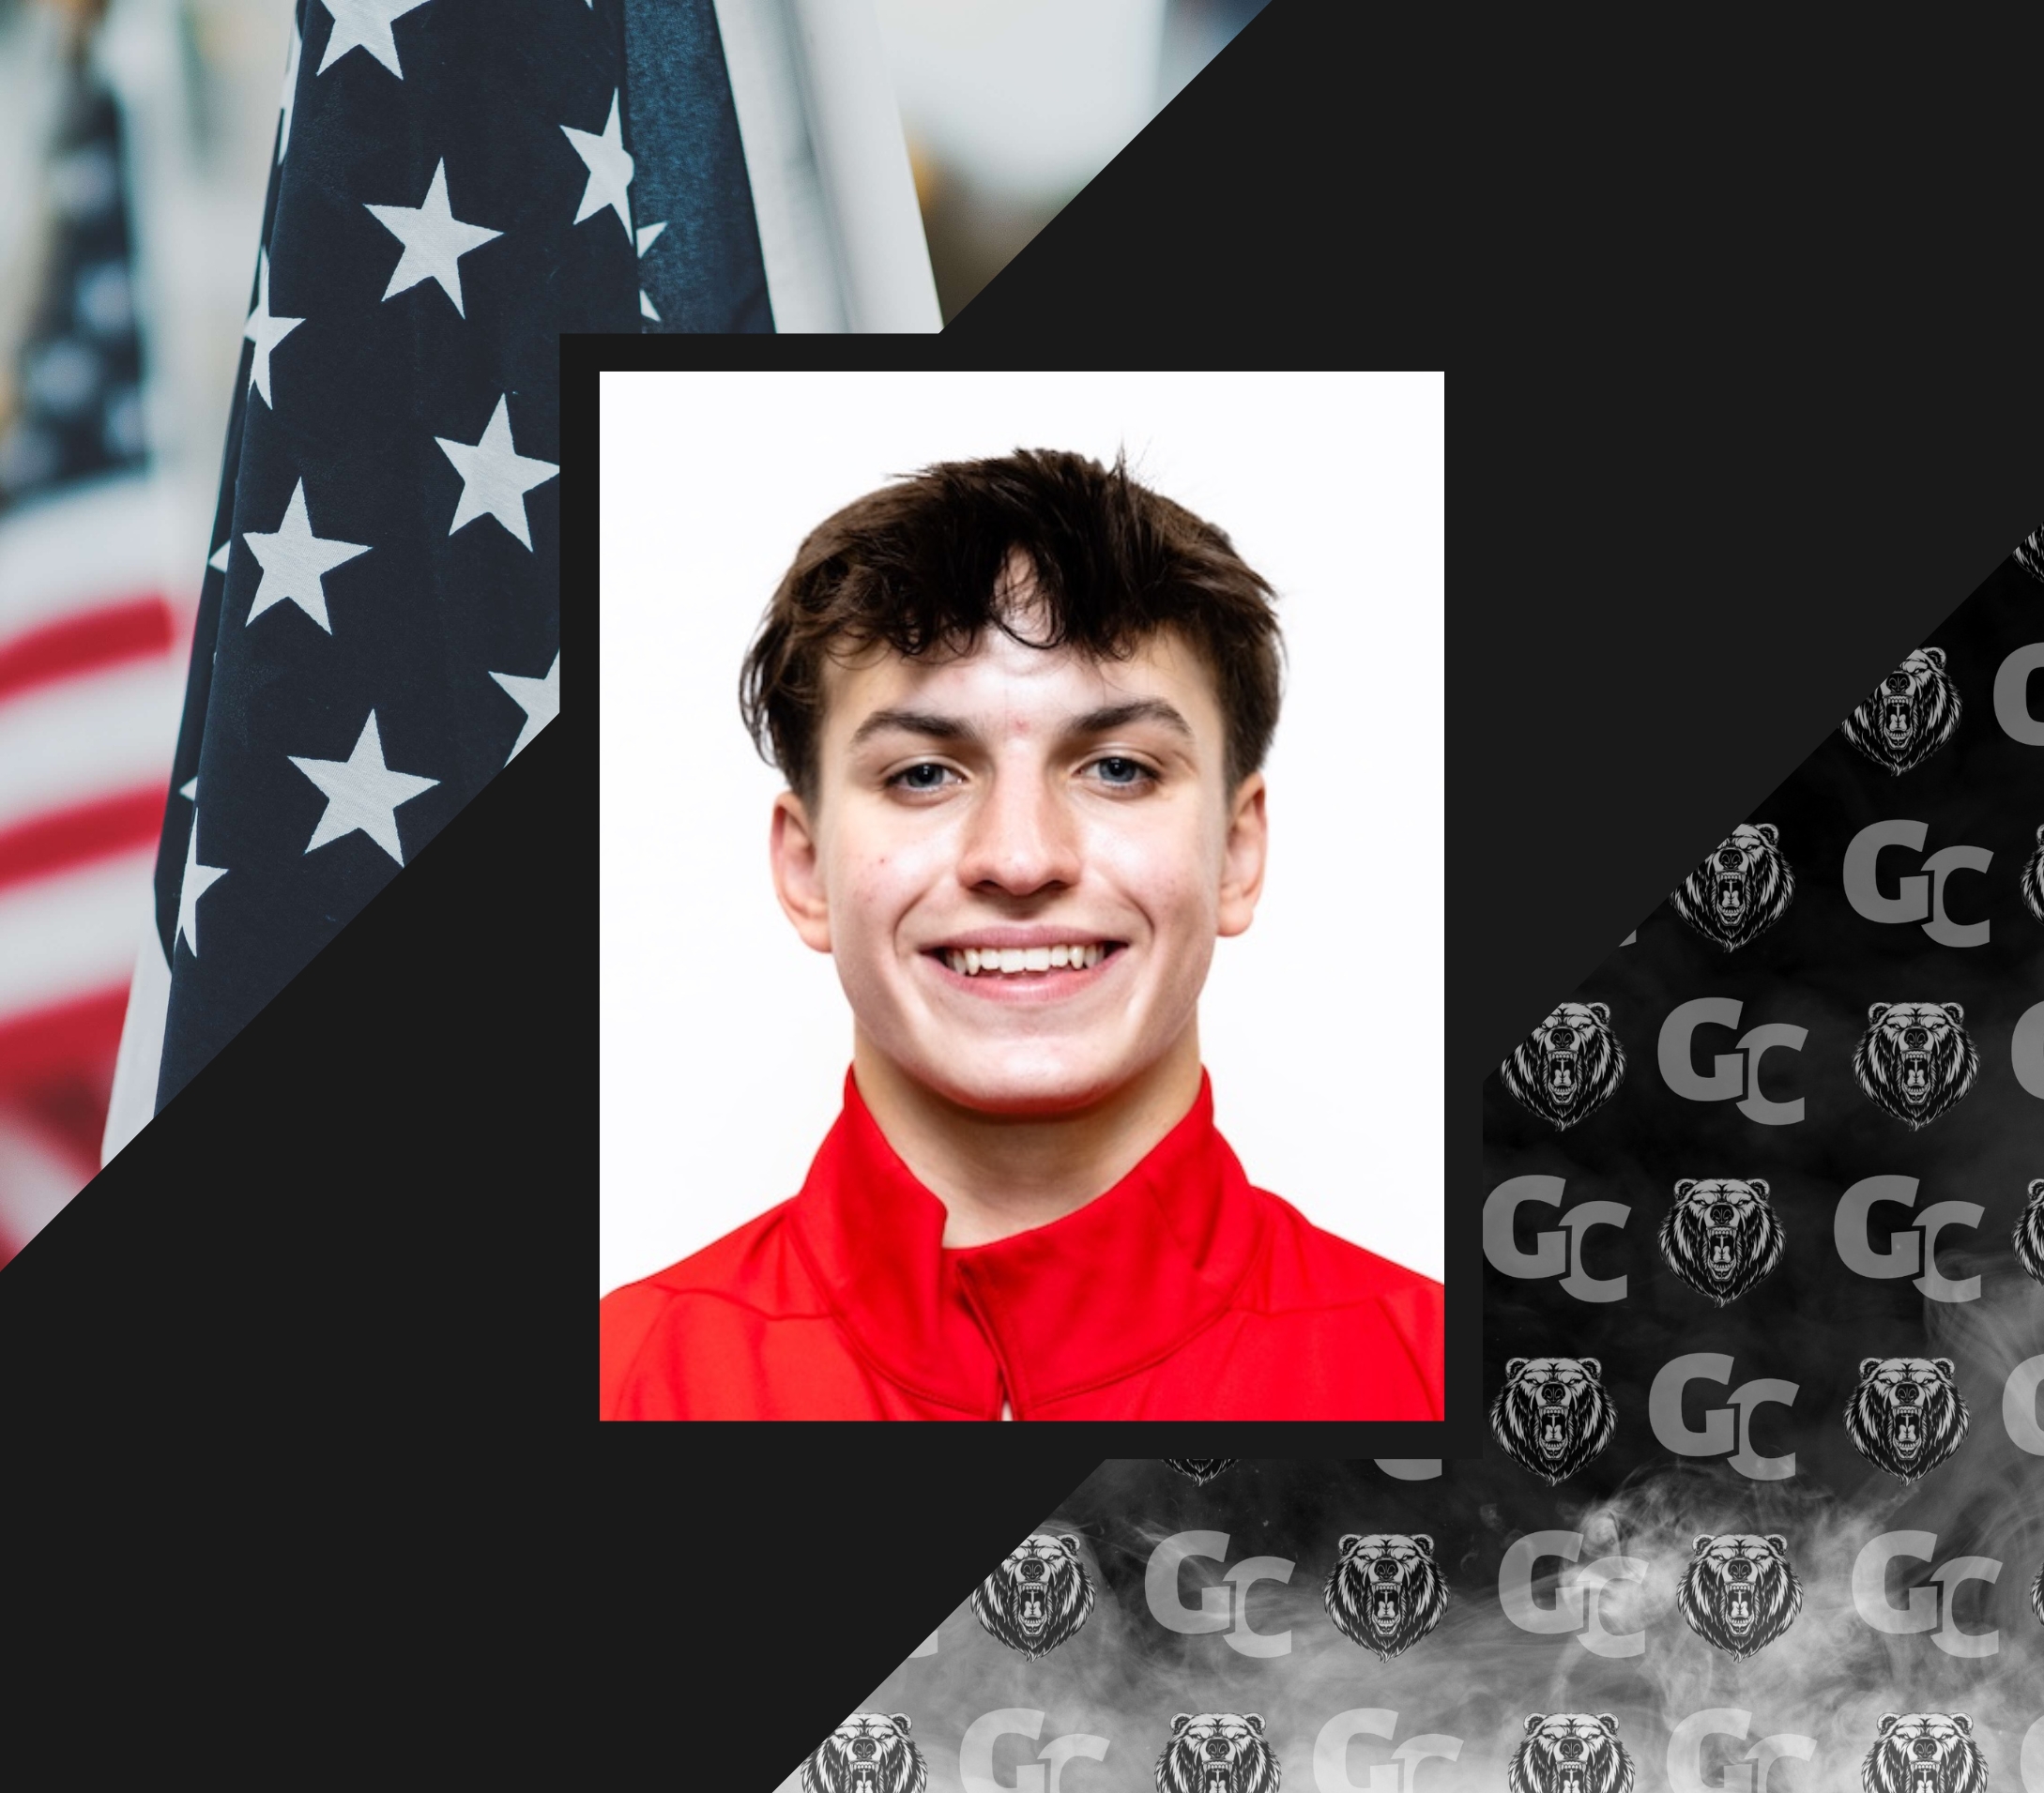 Ty Roderiques is a Men's Junior Team USA athlete competing at the 2024 Grizzly Classic Canada's biggest Men's Artistic Gymnastics Event